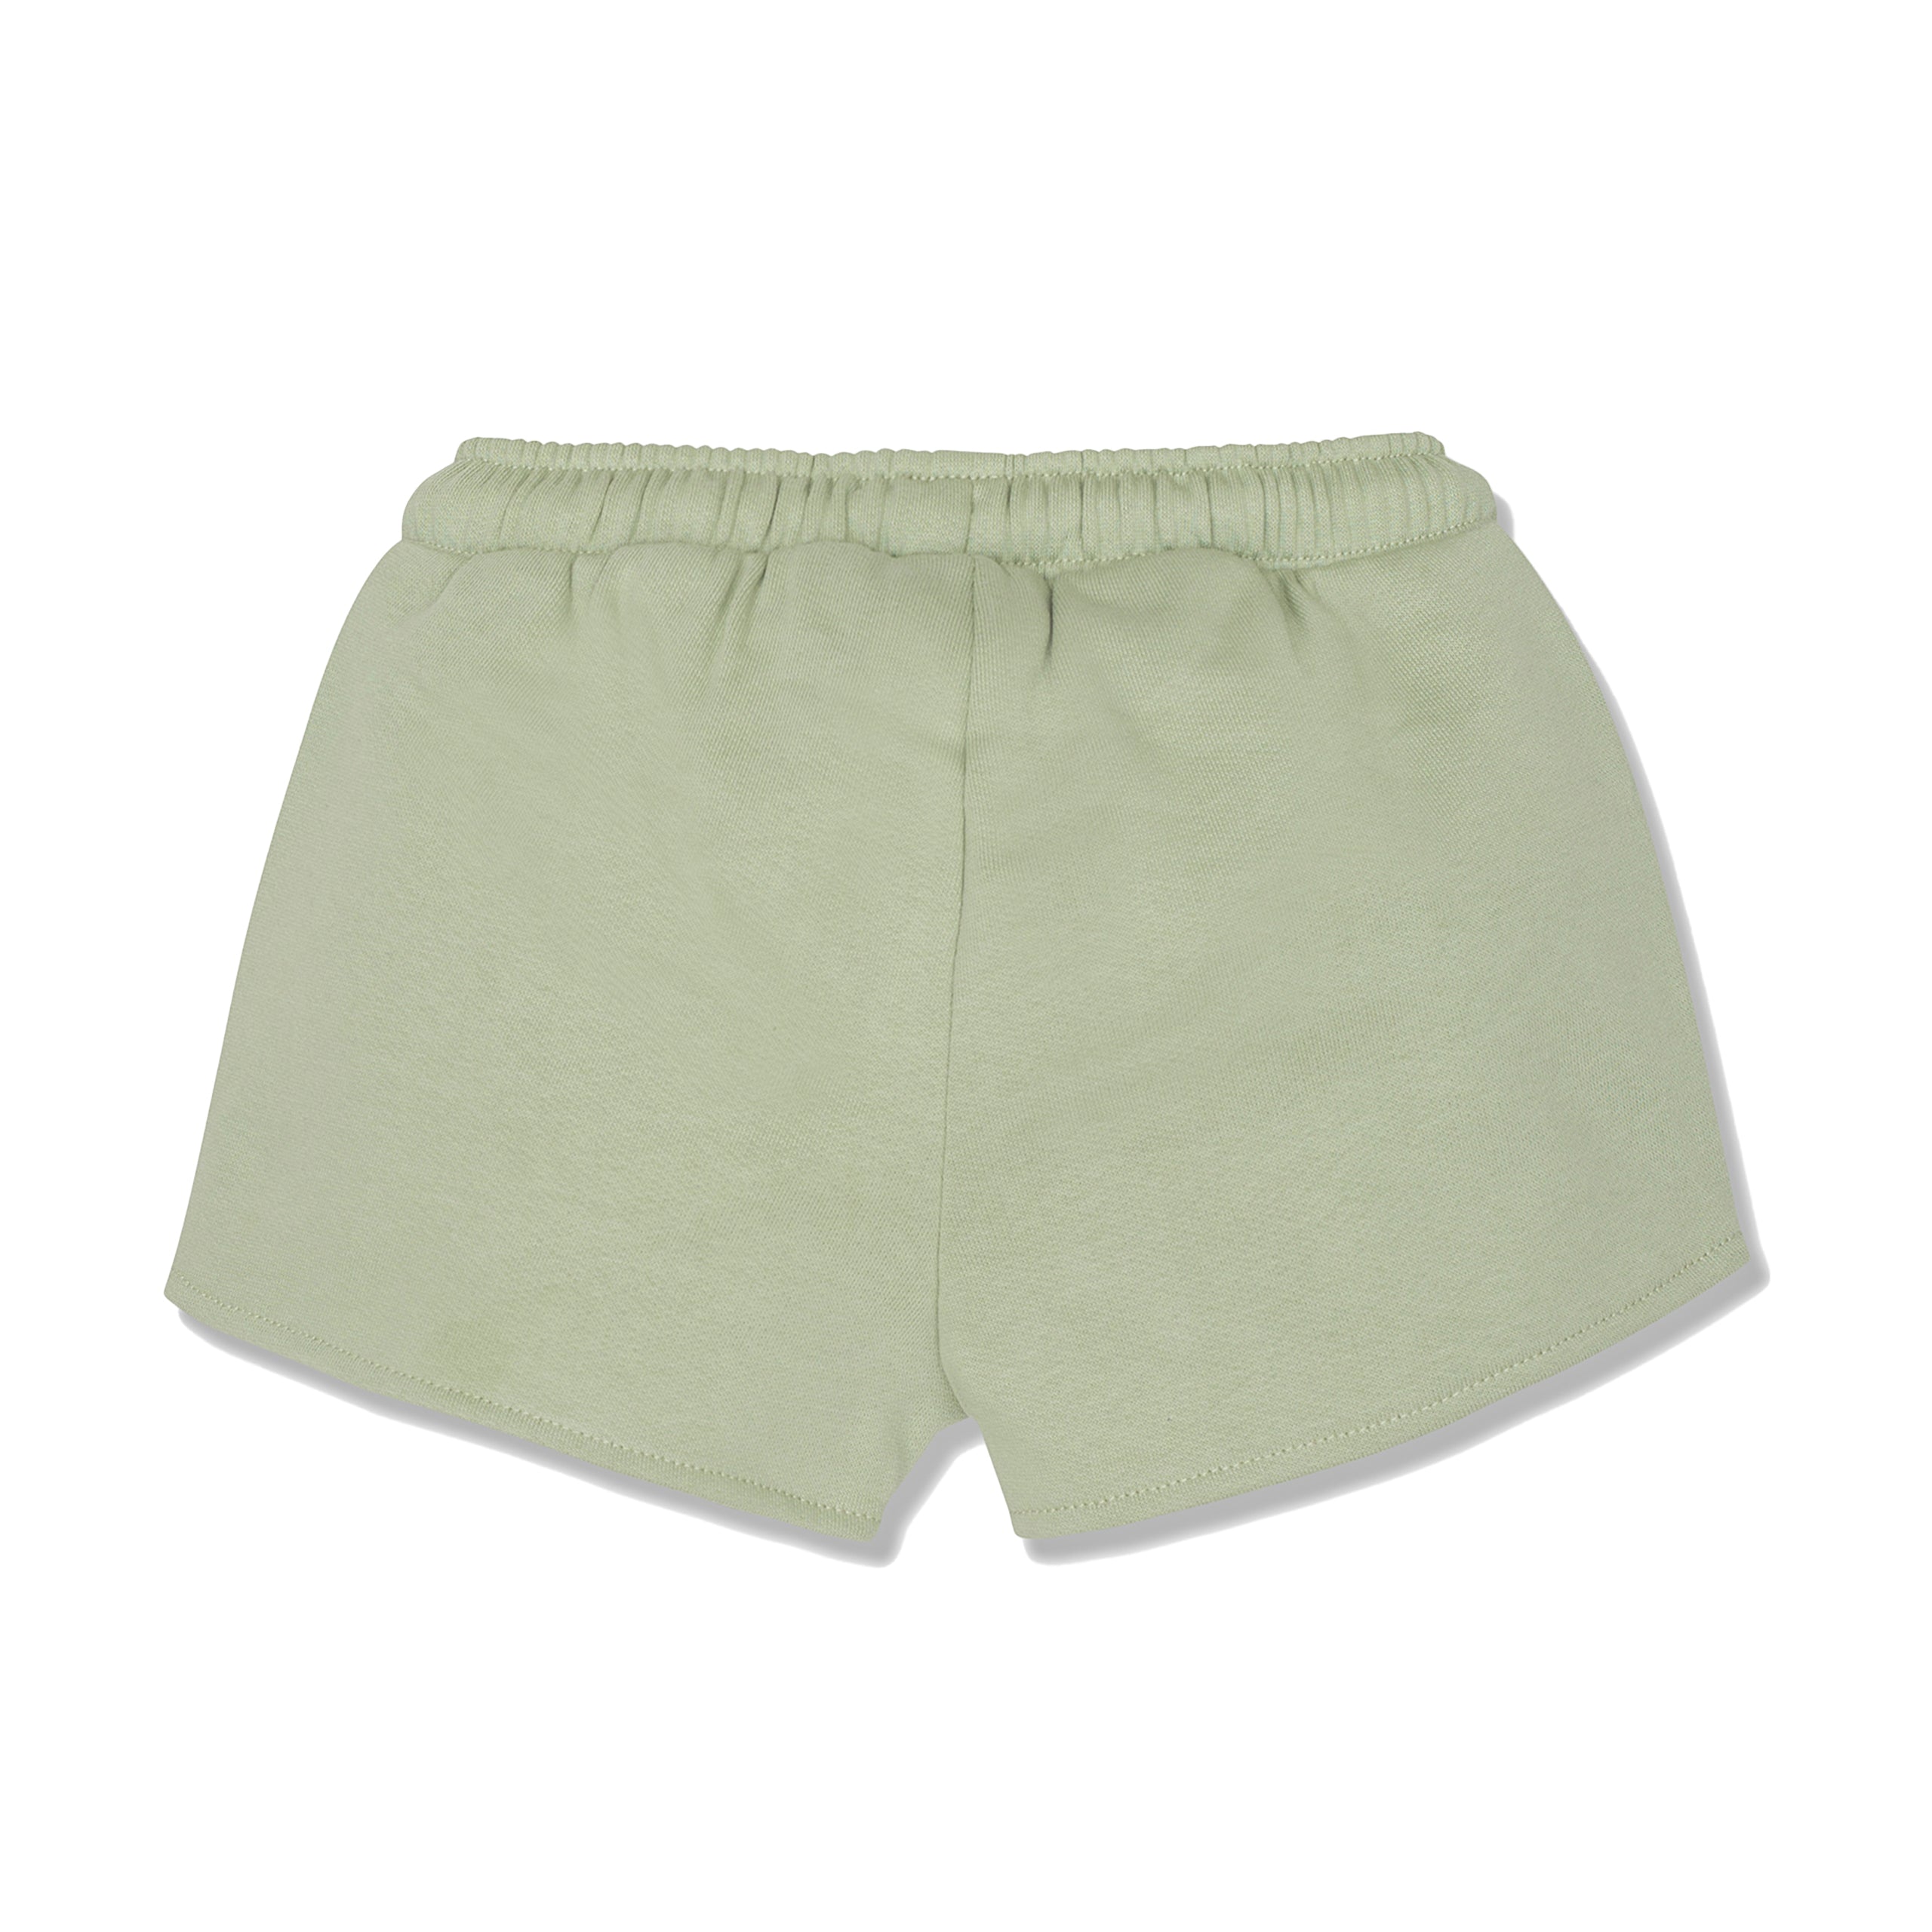 Our soft molleton girl shorts are an easy pull on style with a relaxed fit.